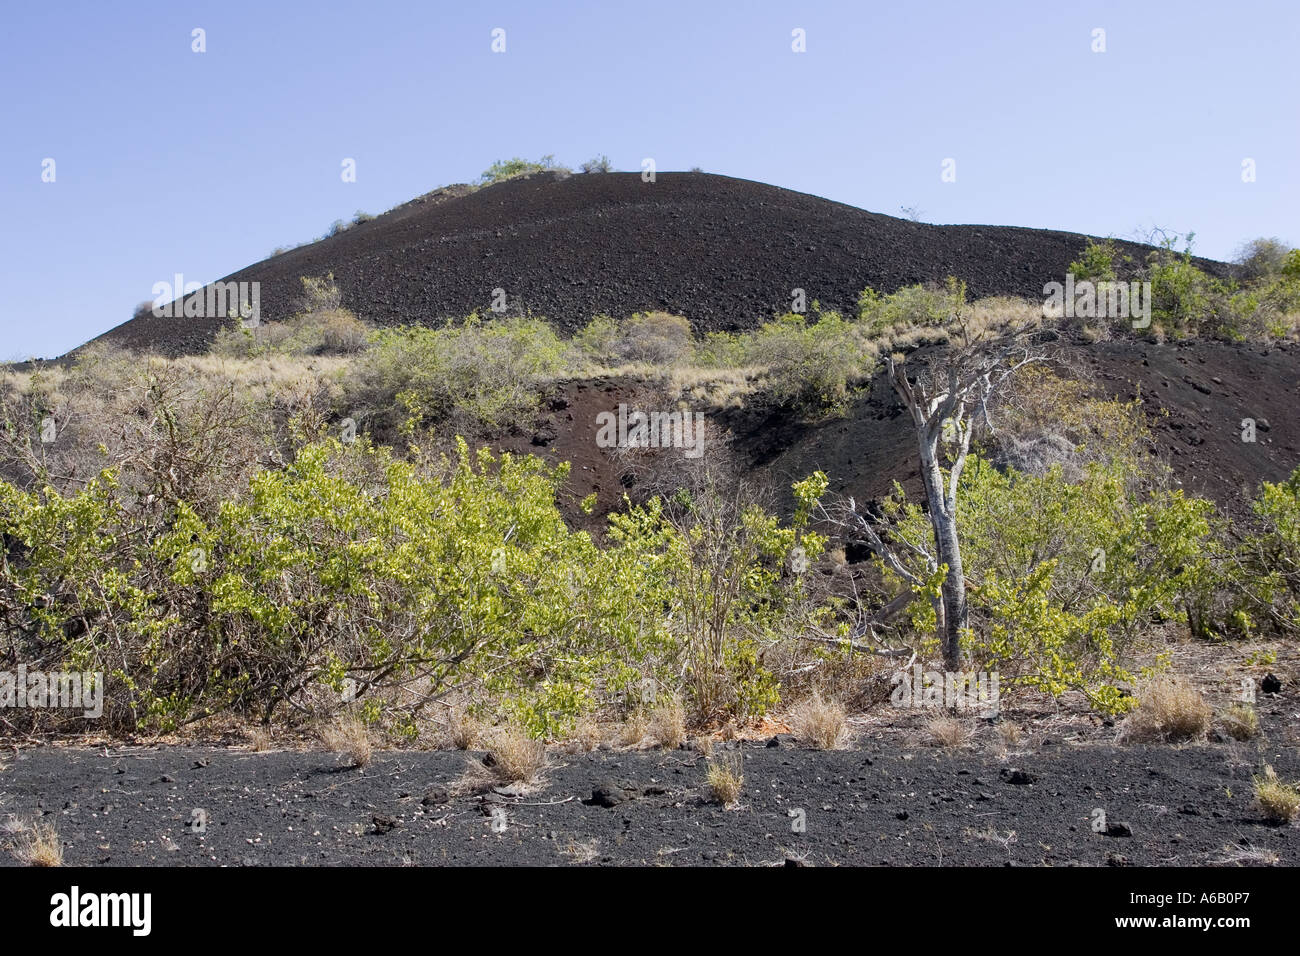 Chaimu lava flow with volcanic cones in background Tsavo National Park West Kenya East Africa Stock Photo